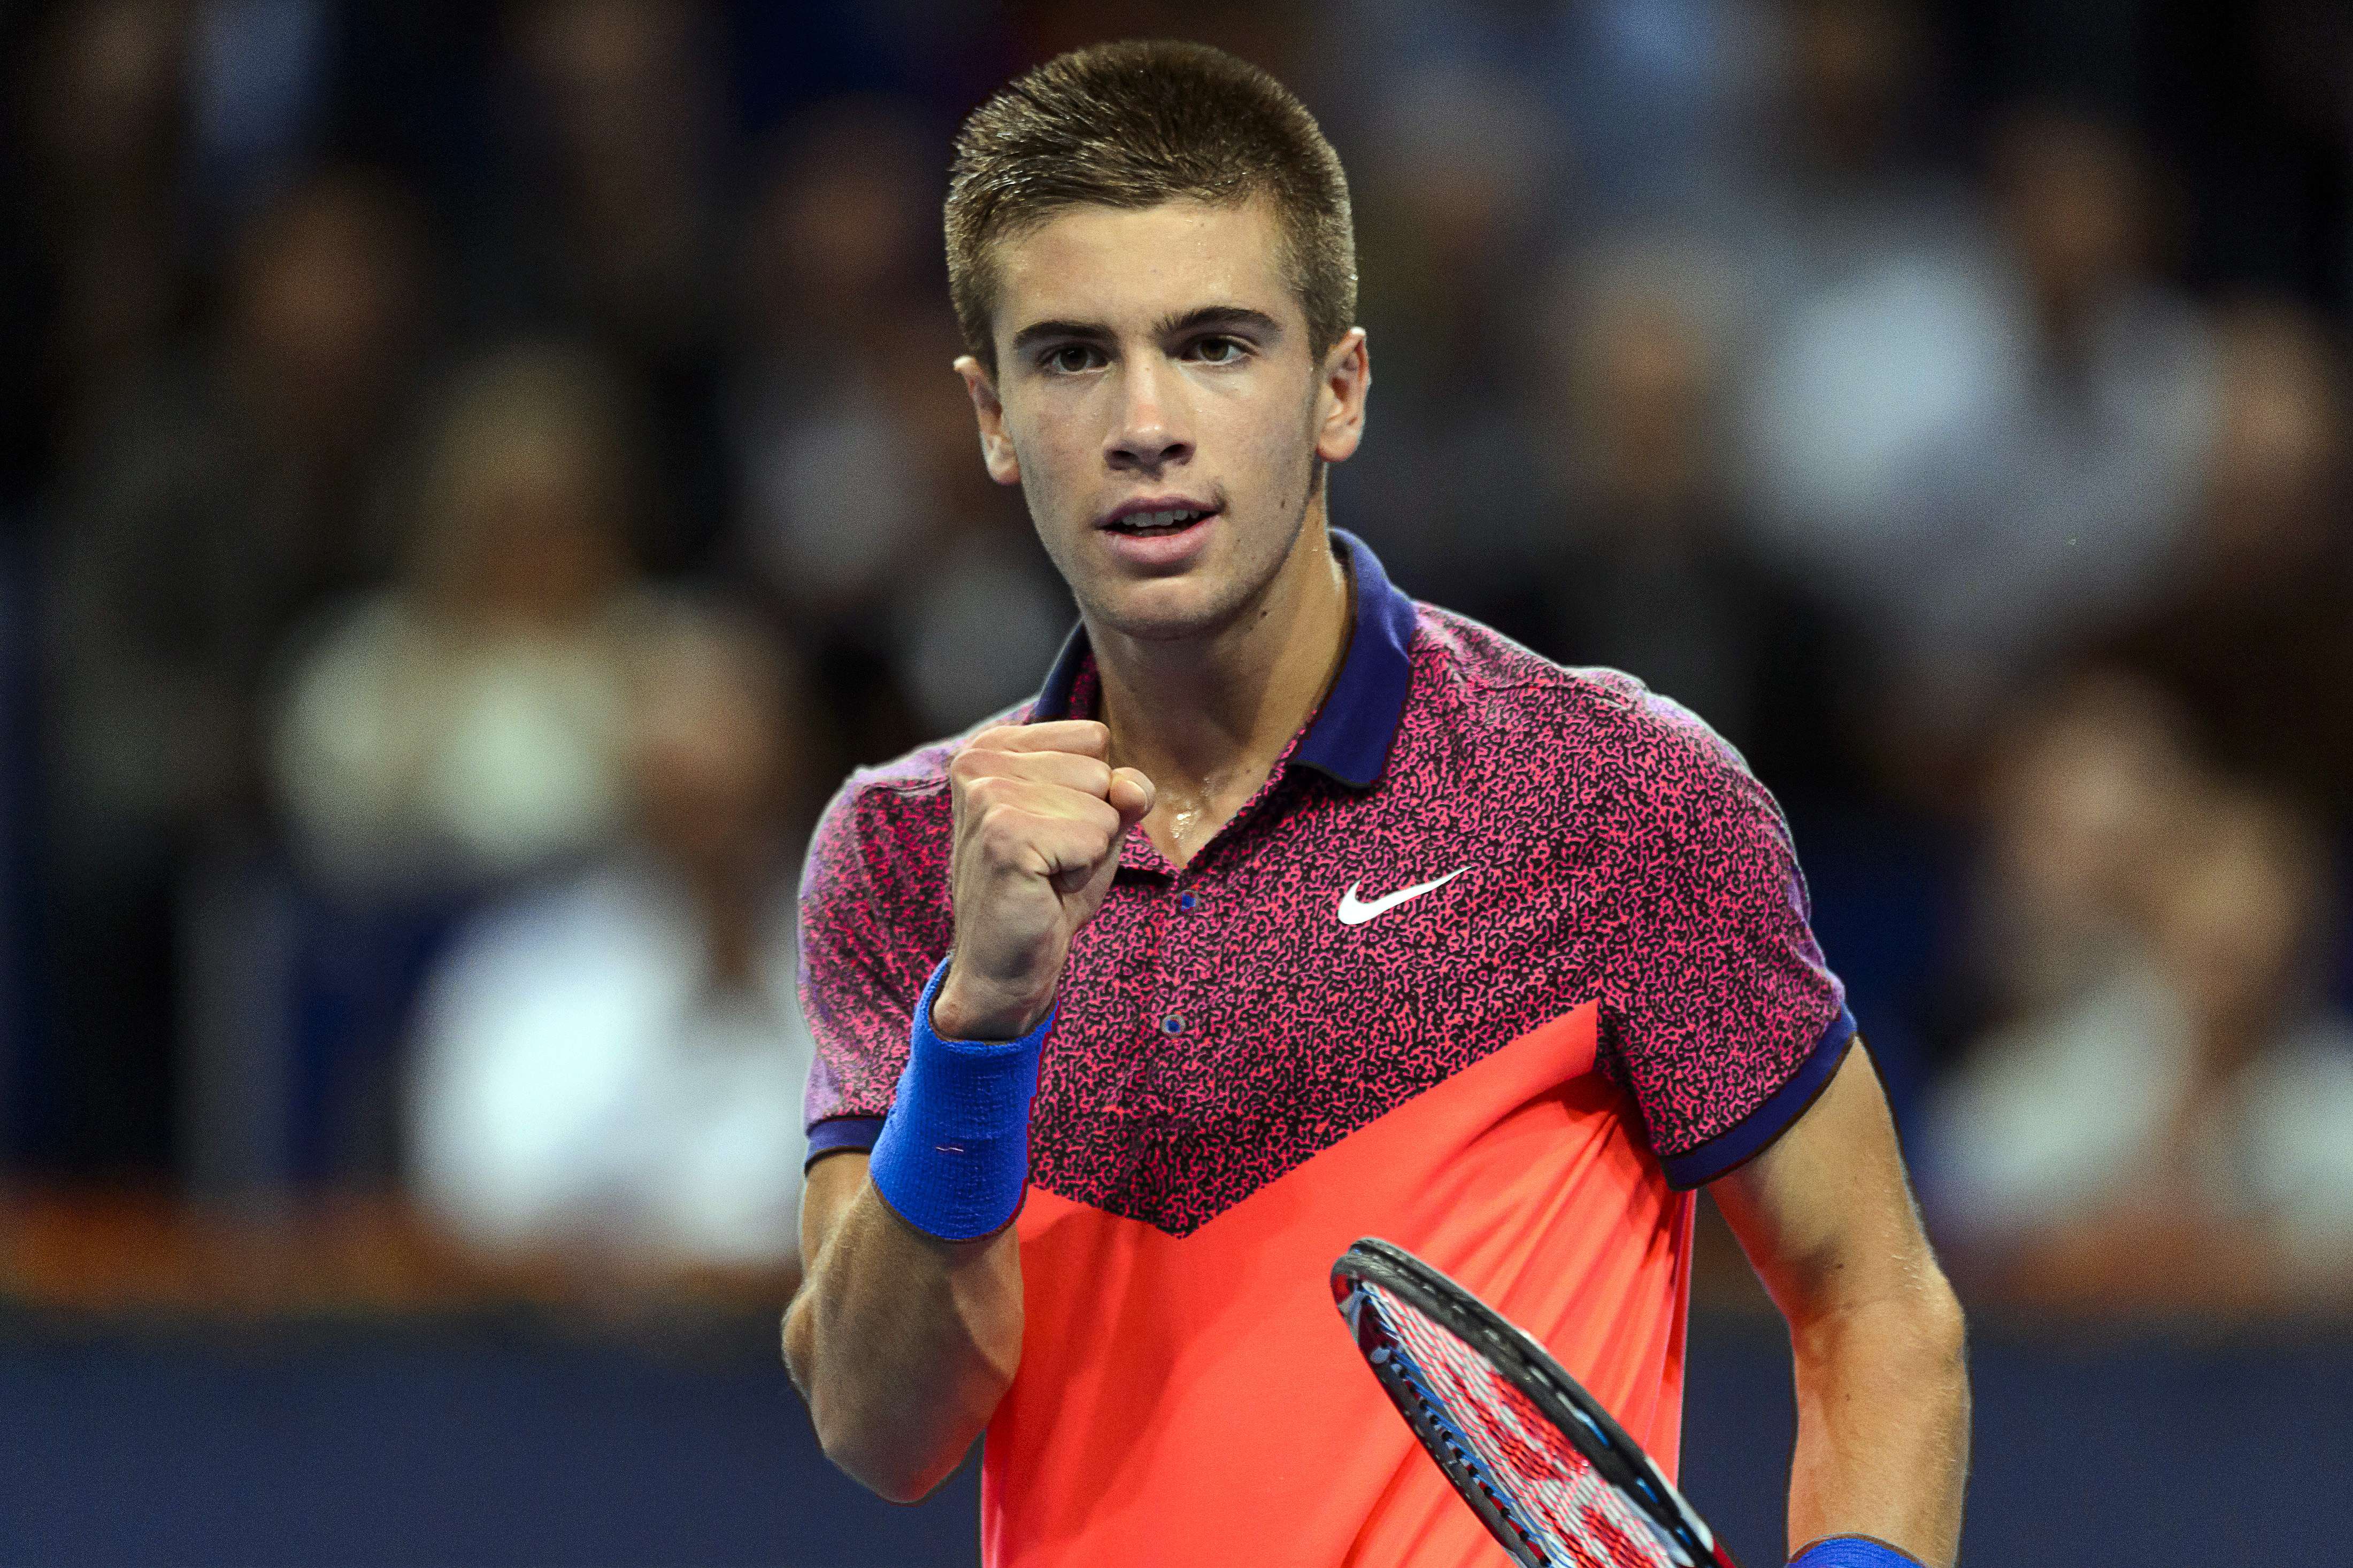 Coric after beating Nadal. (Getty Images)